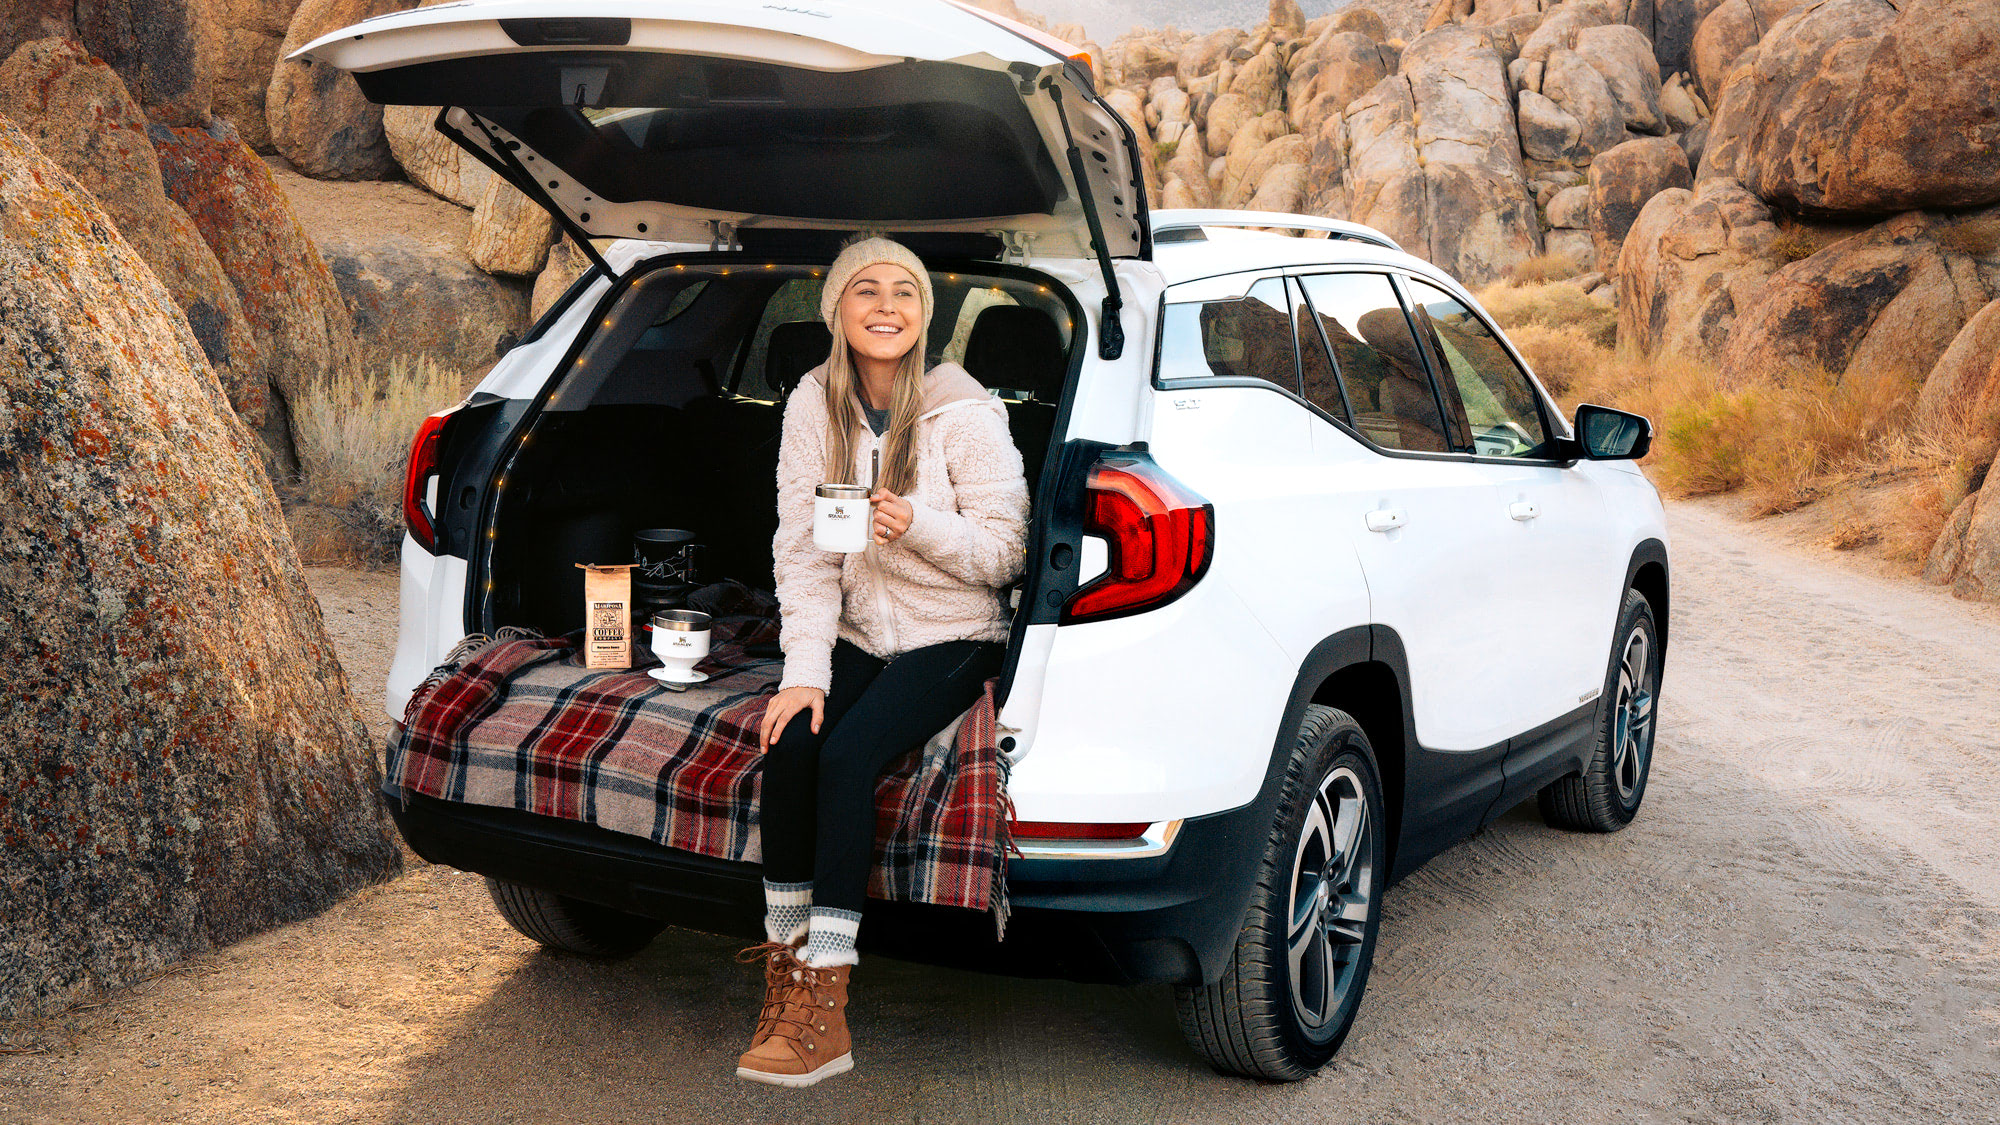 Need coffee while camping? Here are some tips - AZ Big Media